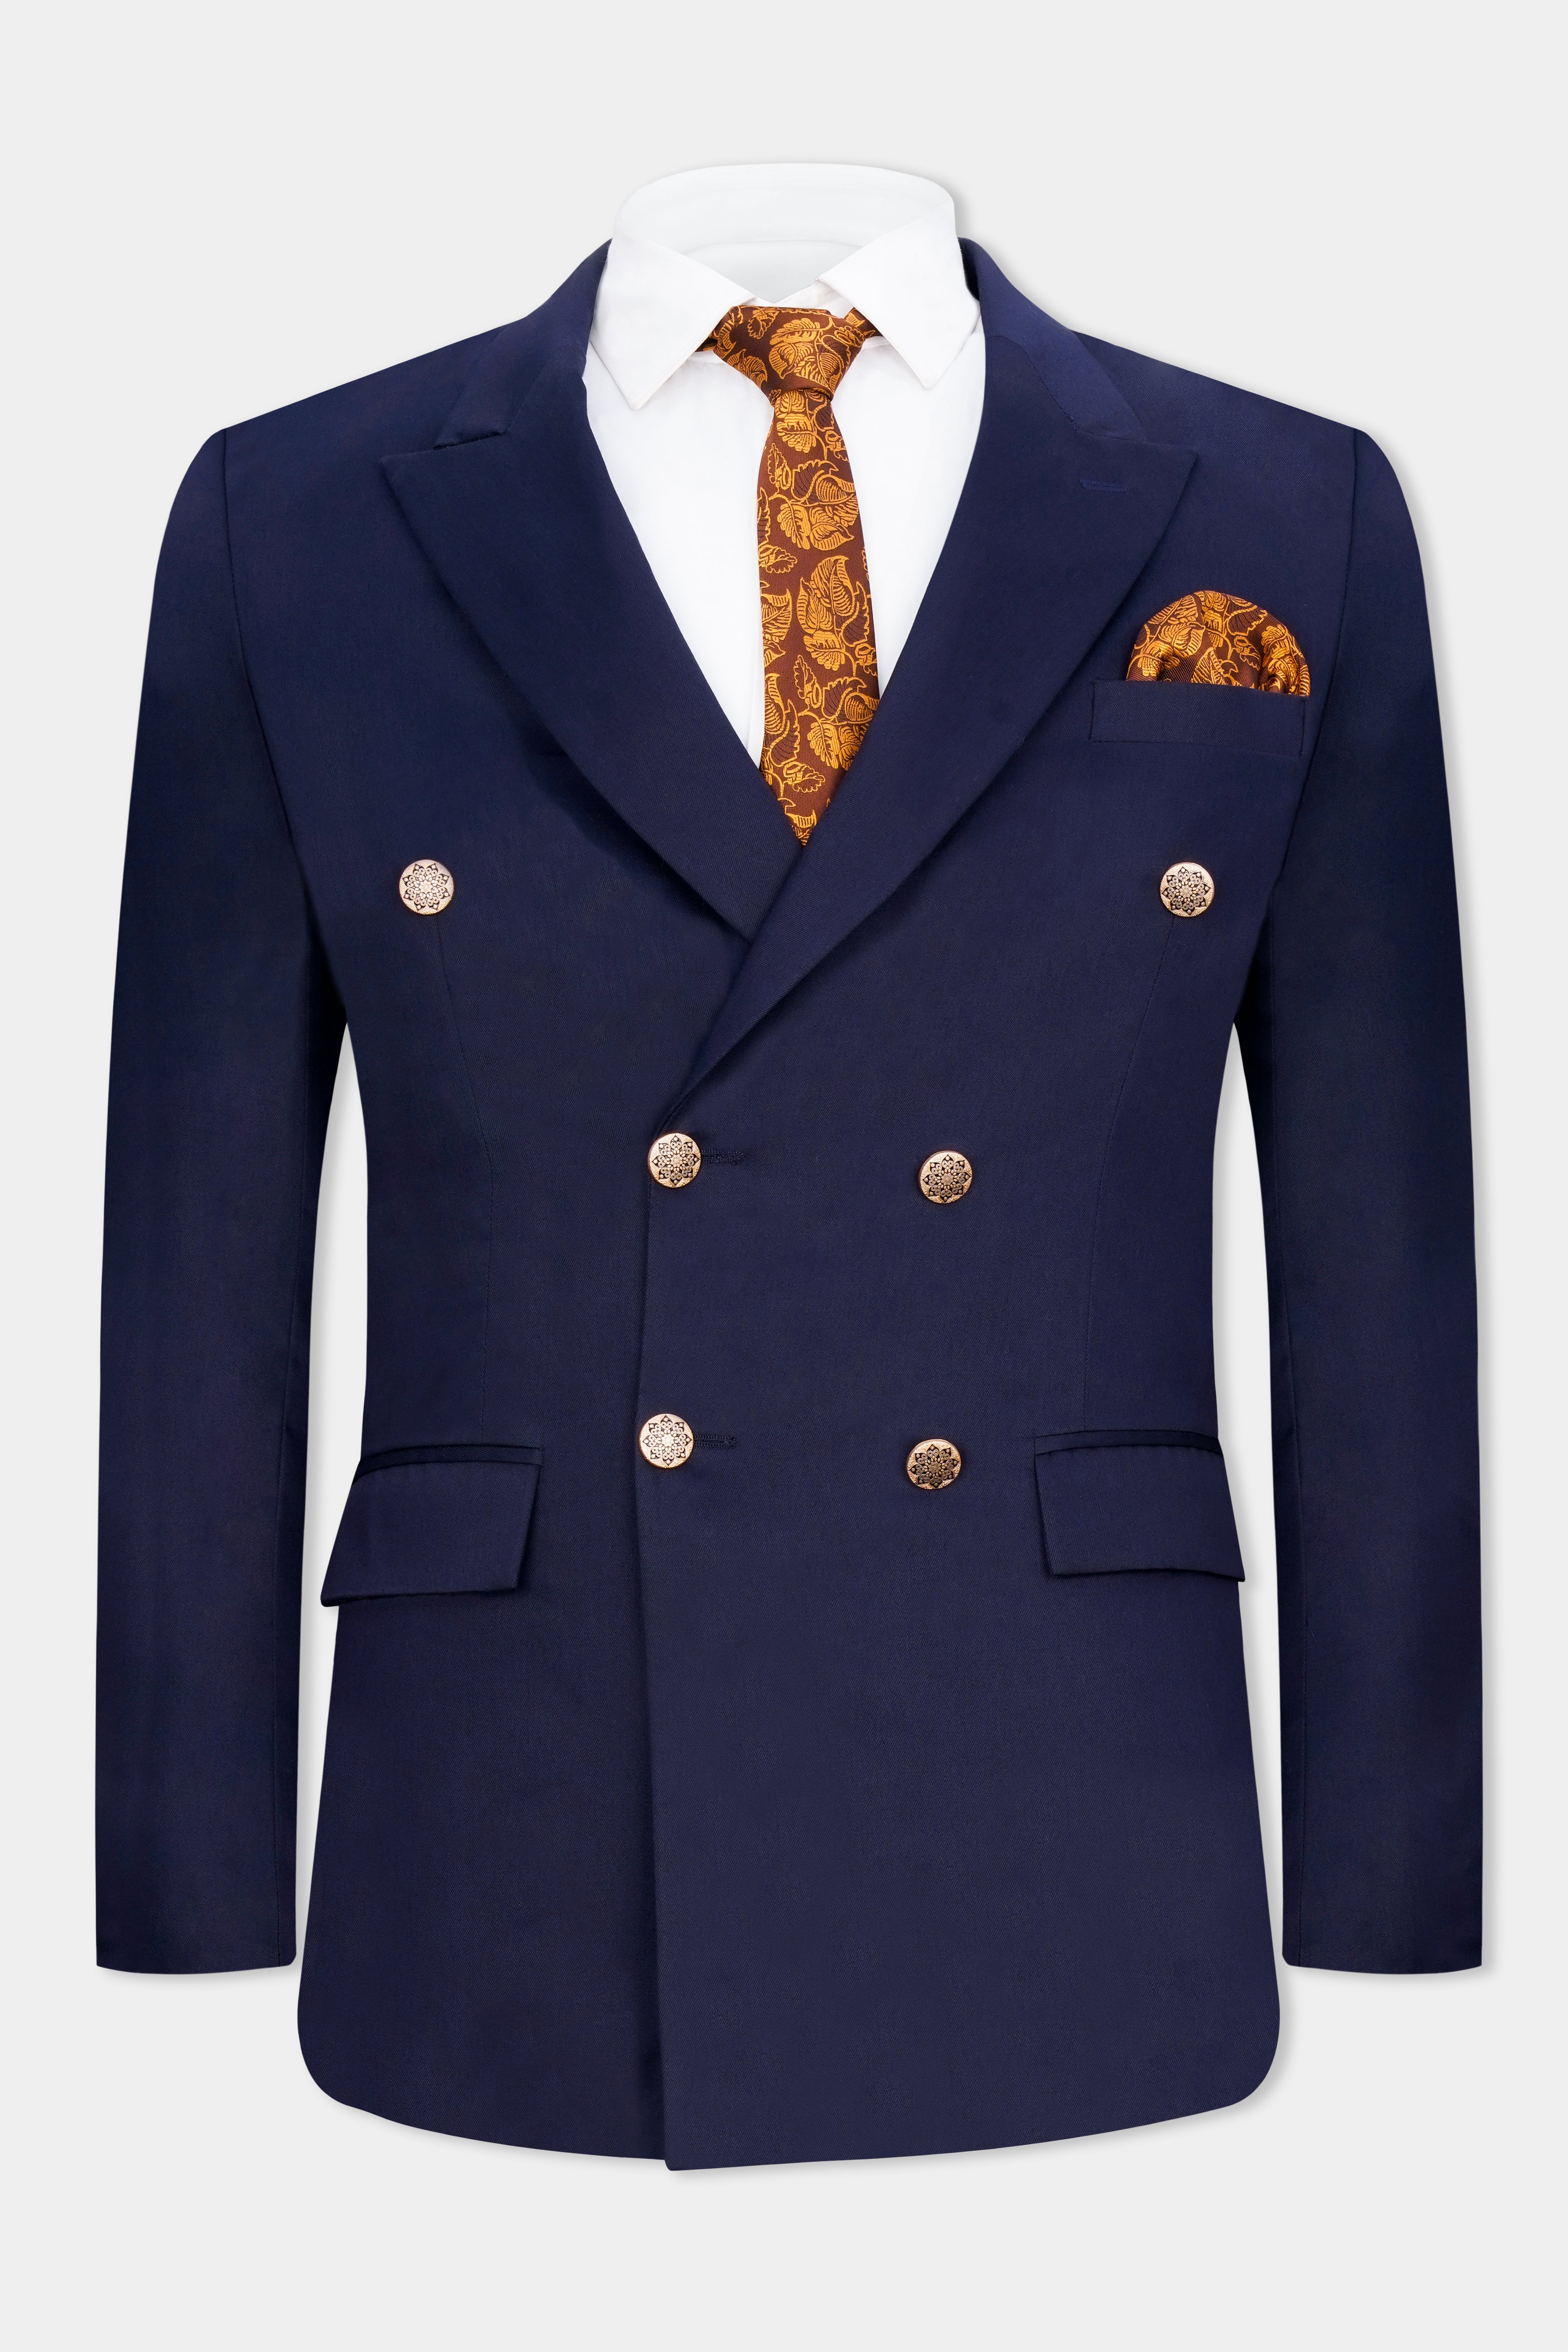 Ebony Clay Blue Wool Rich Double Breasted Suit ST3062-DB-GB-36, ST3062-DB-GB-38, ST3062-DB-GB-40, ST3062-DB-GB-42, ST3062-DB-GB-44, ST3062-DB-GB-46, ST3062-DB-GB-48, ST3062-DB-GB-50, ST3062-DB-GB-52, ST3062-DB-GB-54, ST3062-DB-GB-56, ST3062-DB-GB-58, ST3062-DB-GB-60